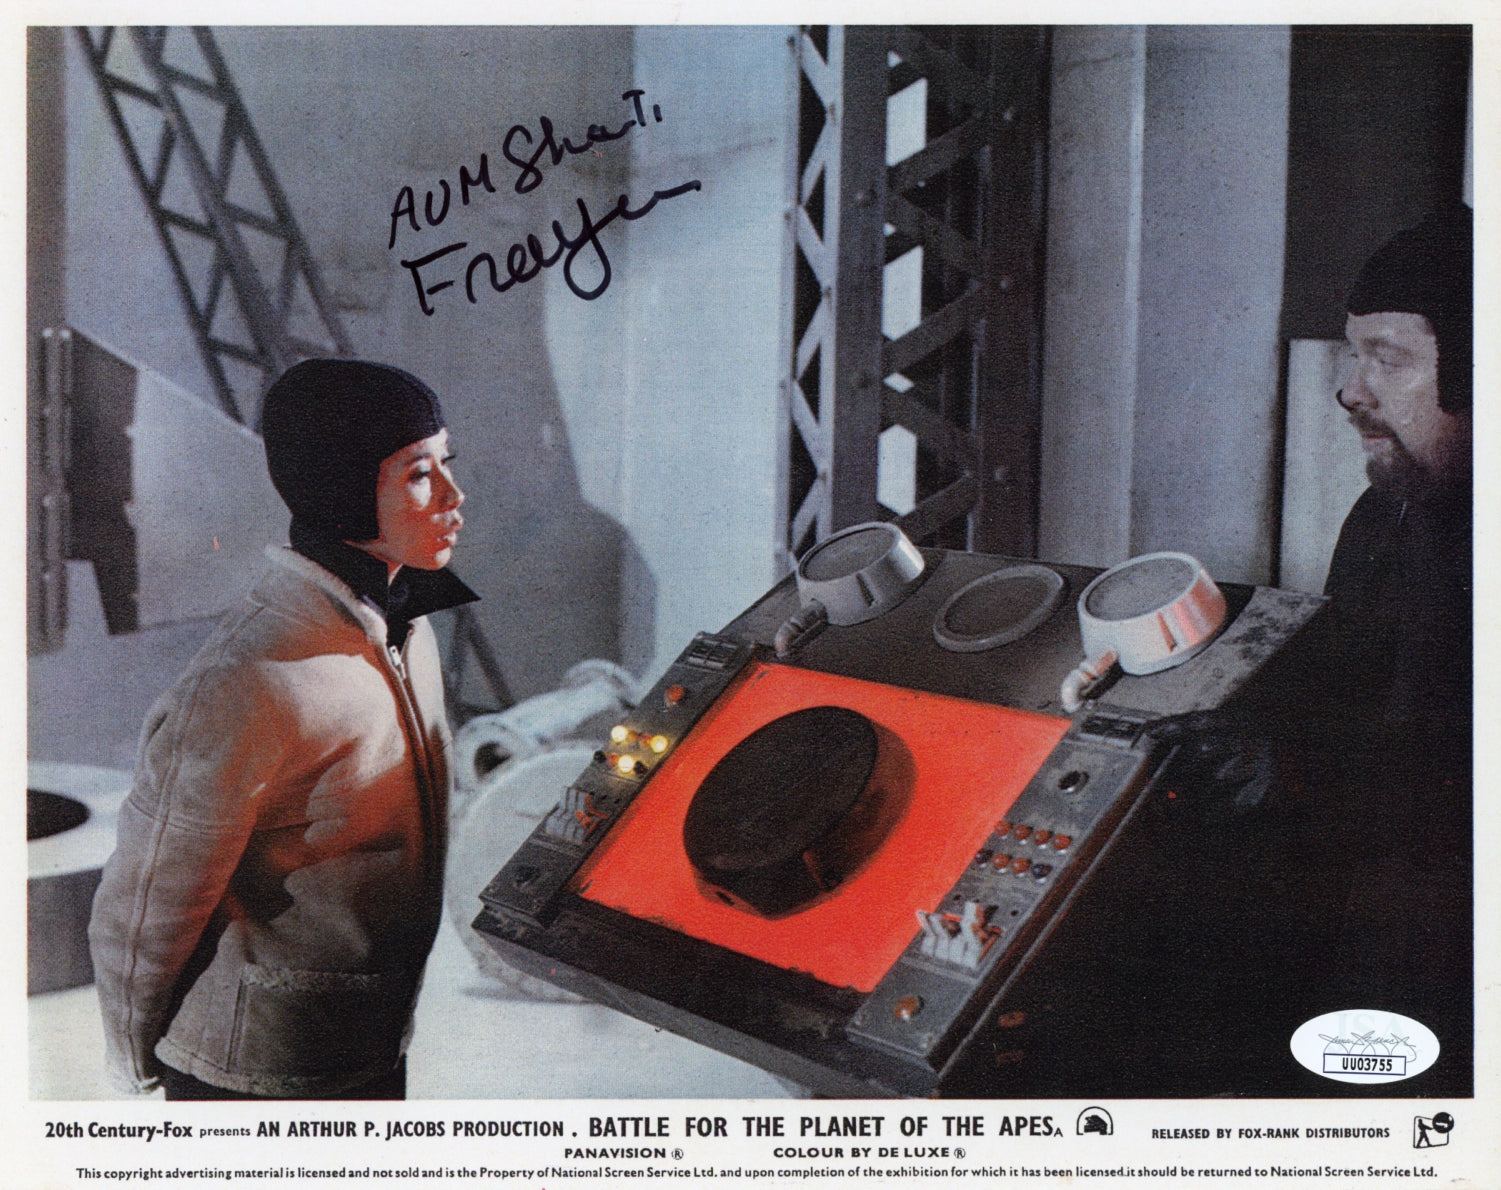 France Nuyen Battle for the Planet of the Apes 8x10 Signed Lobby Card JSA COA Certified Autograph